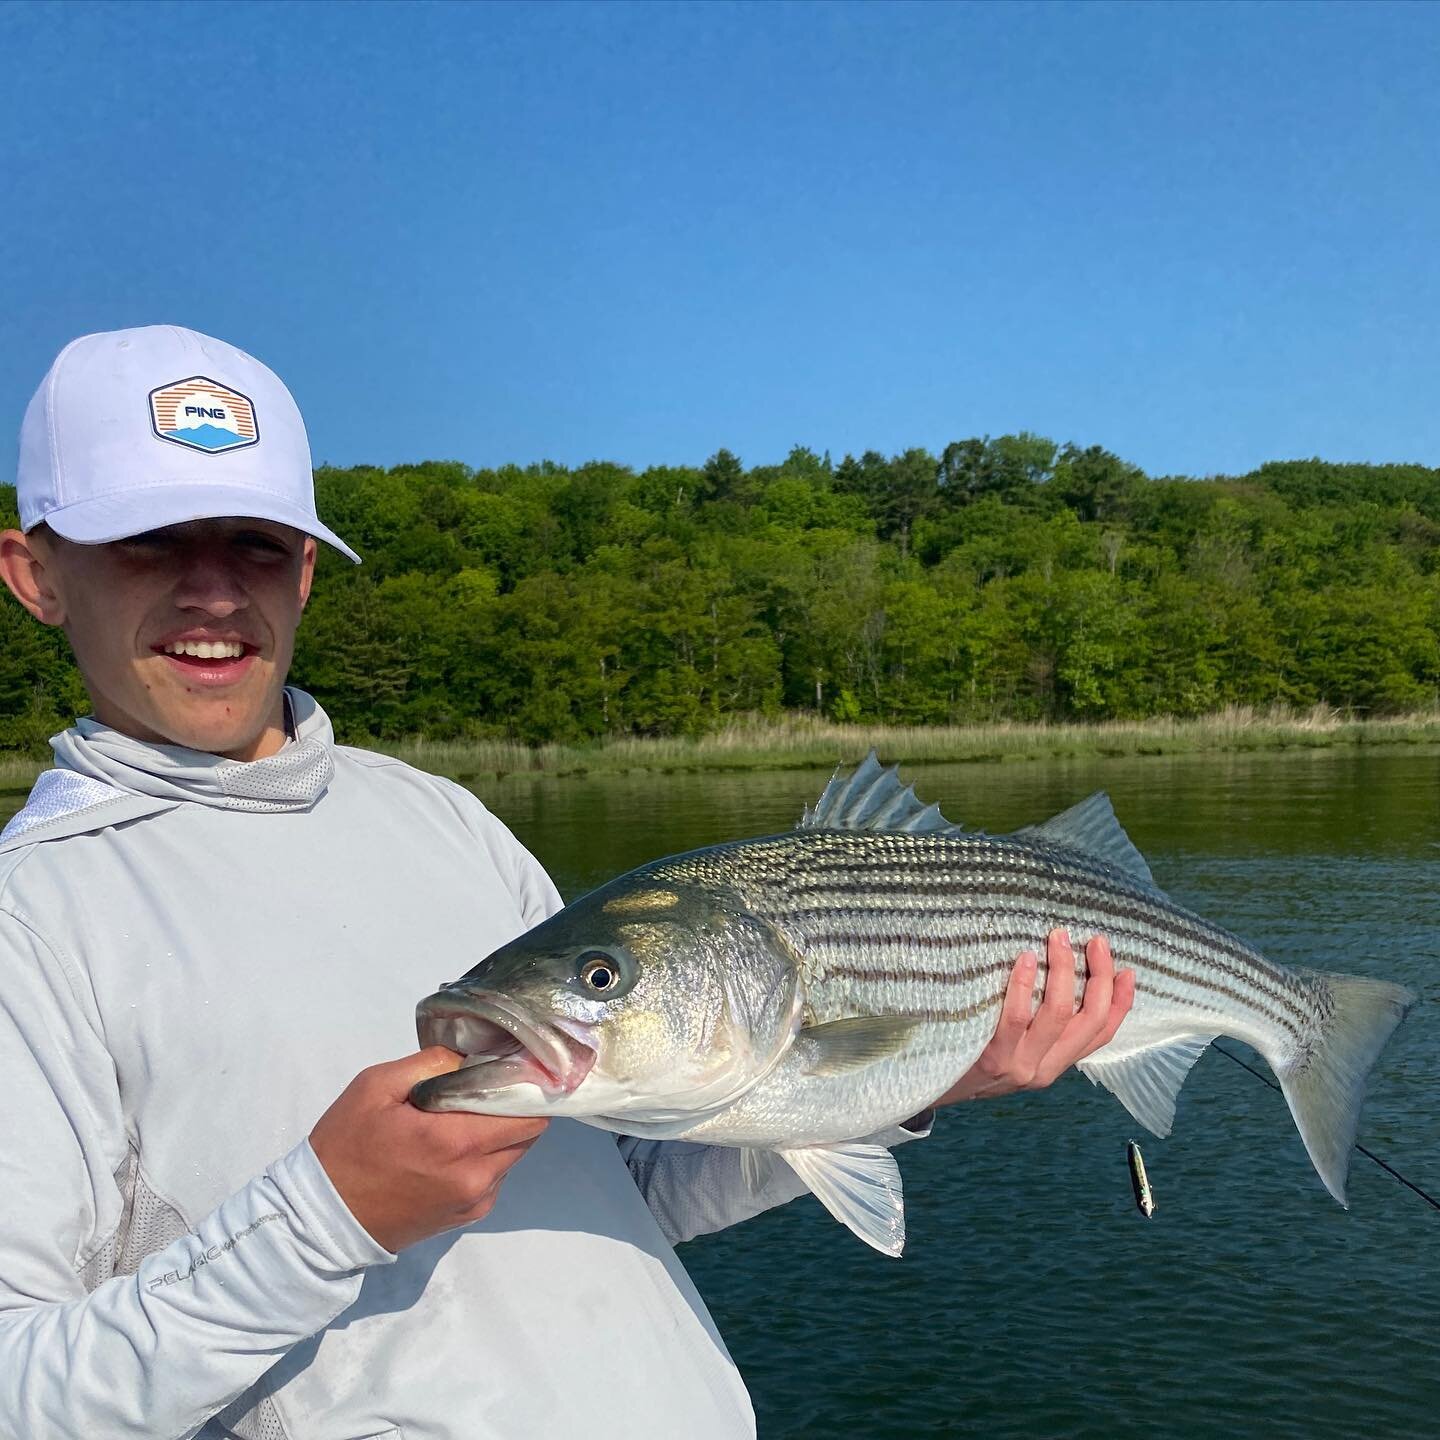 Got out with the boys this morning. Fish were a little picky today but they are there and would eat - including this topwater fish. The photo does not do it justice - this was one of the fattest fish I have seen.  #stripedbass #catchansrelease #casco